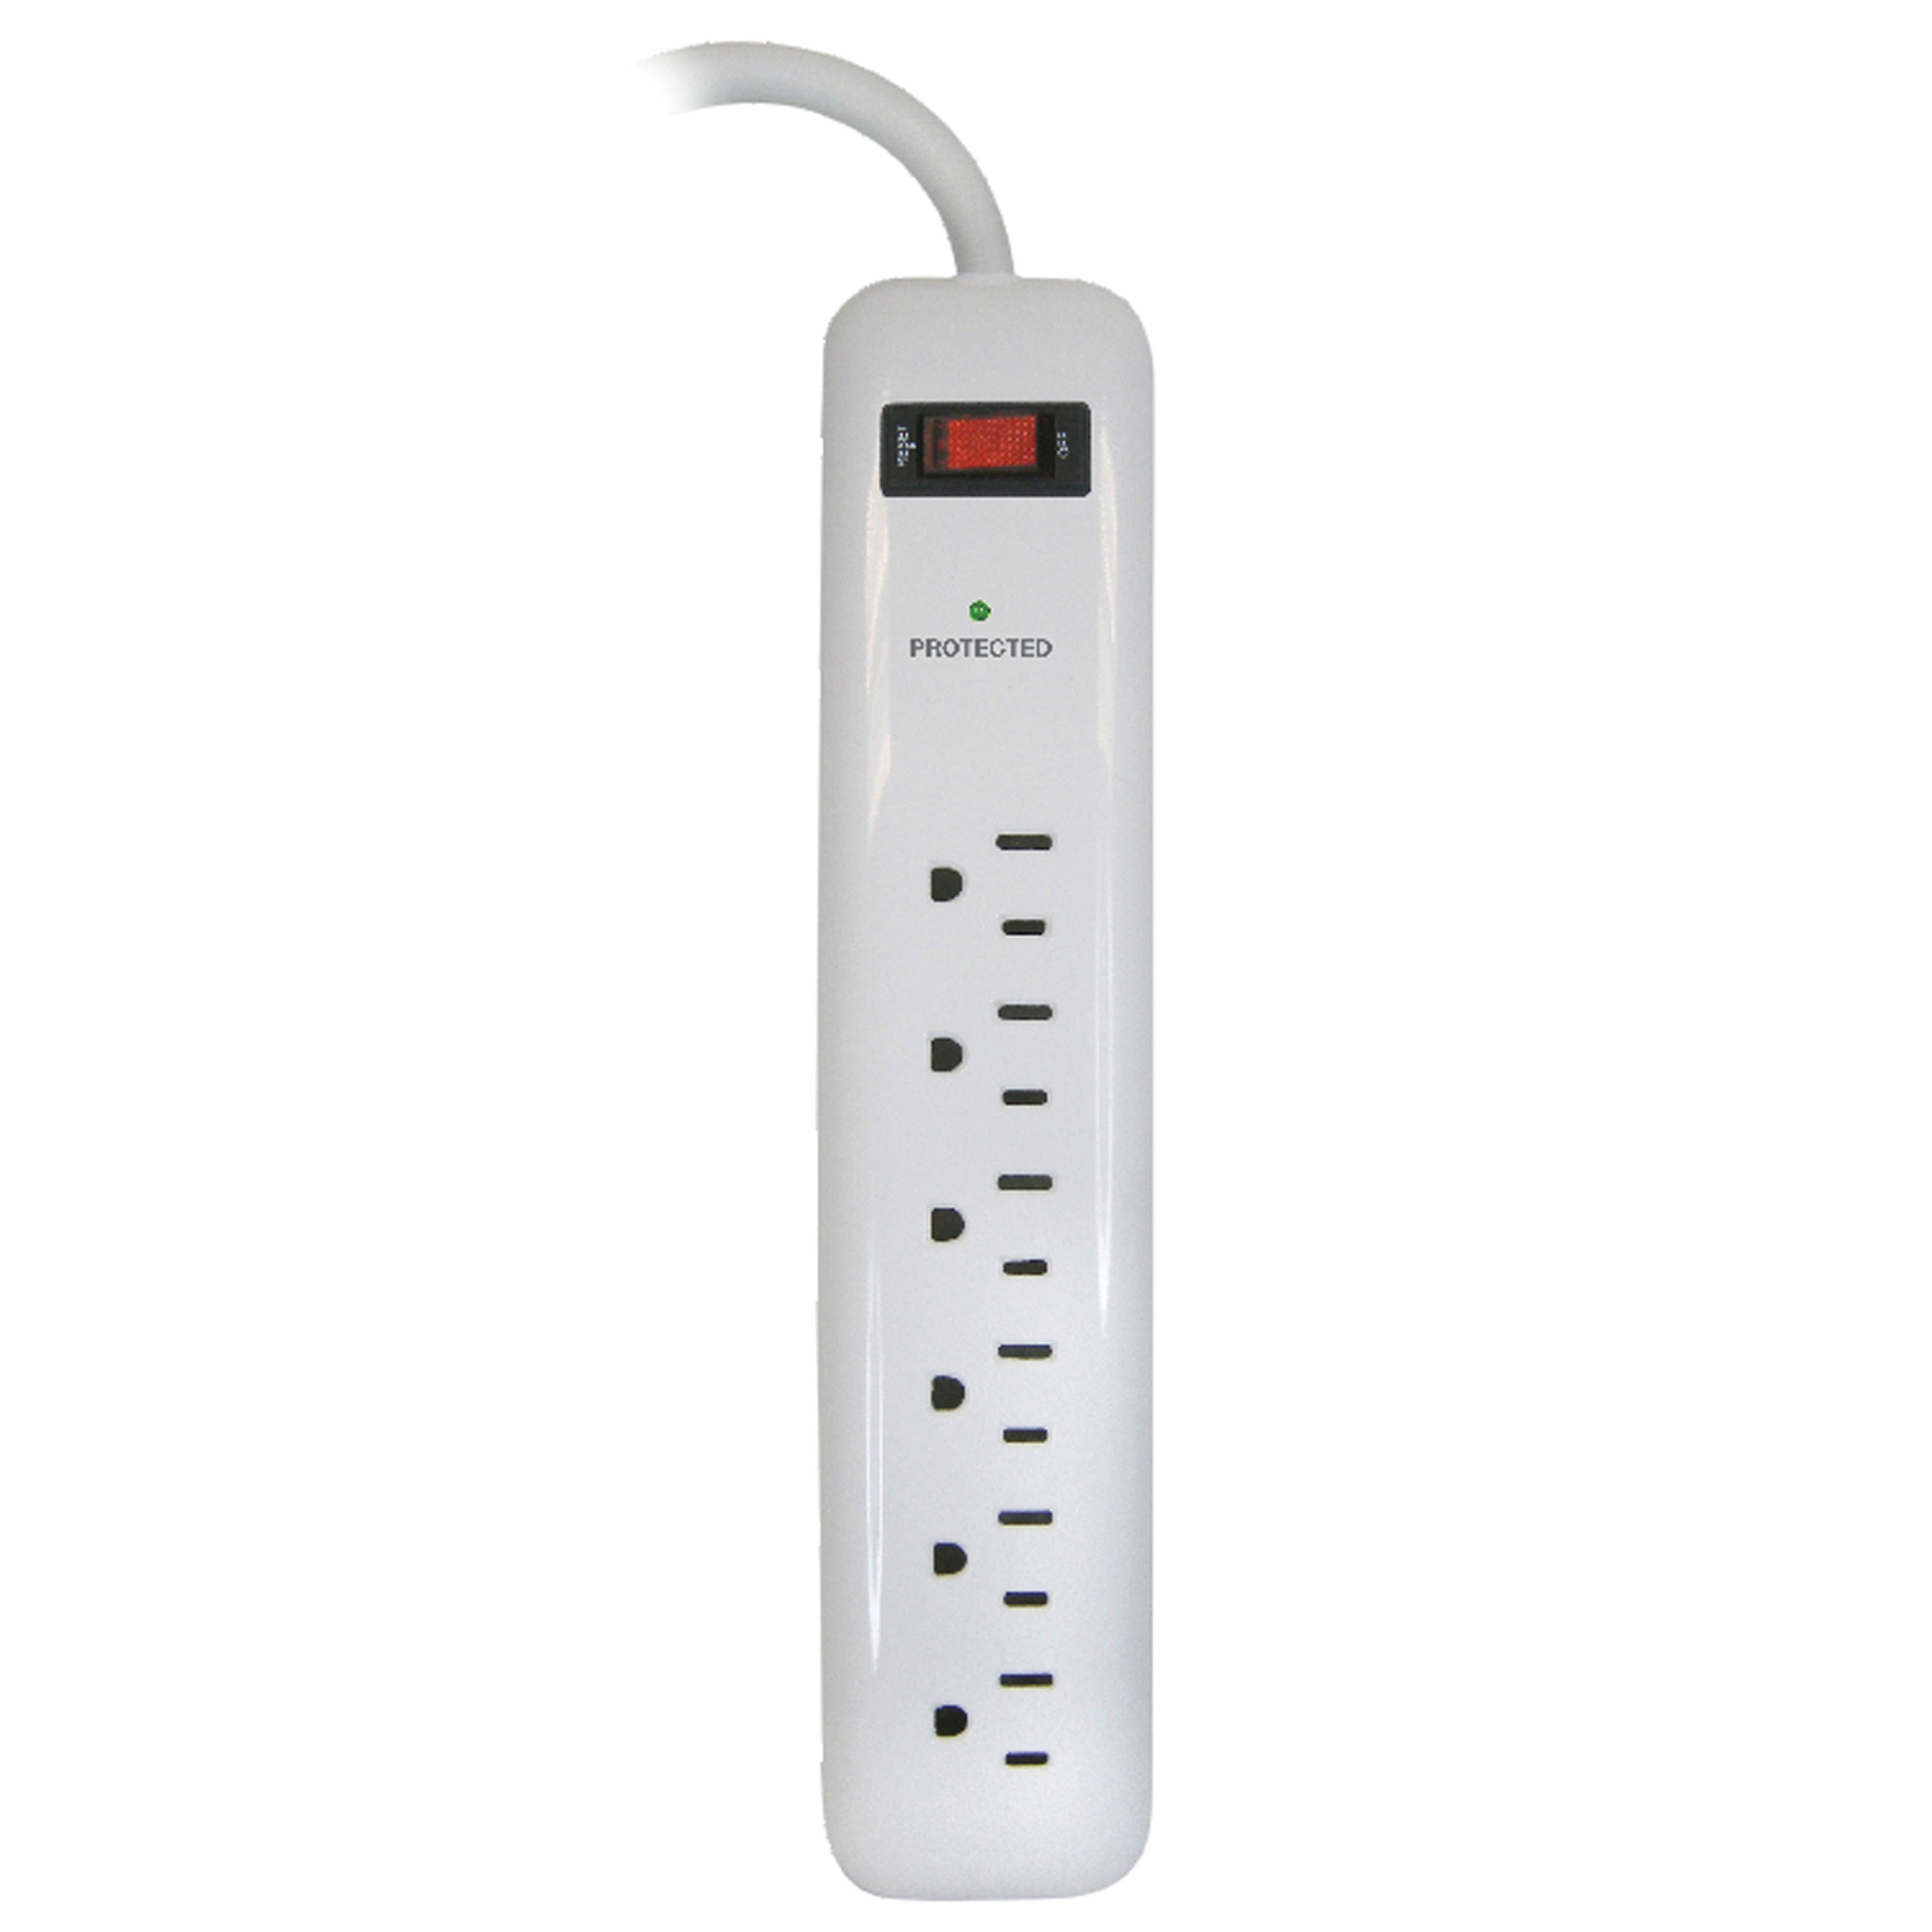 PowerZone OR802126 Surge Protector Power Strip, 125 V, 15 A, 6-Outlet, 1000 Joules Energy, White - 3